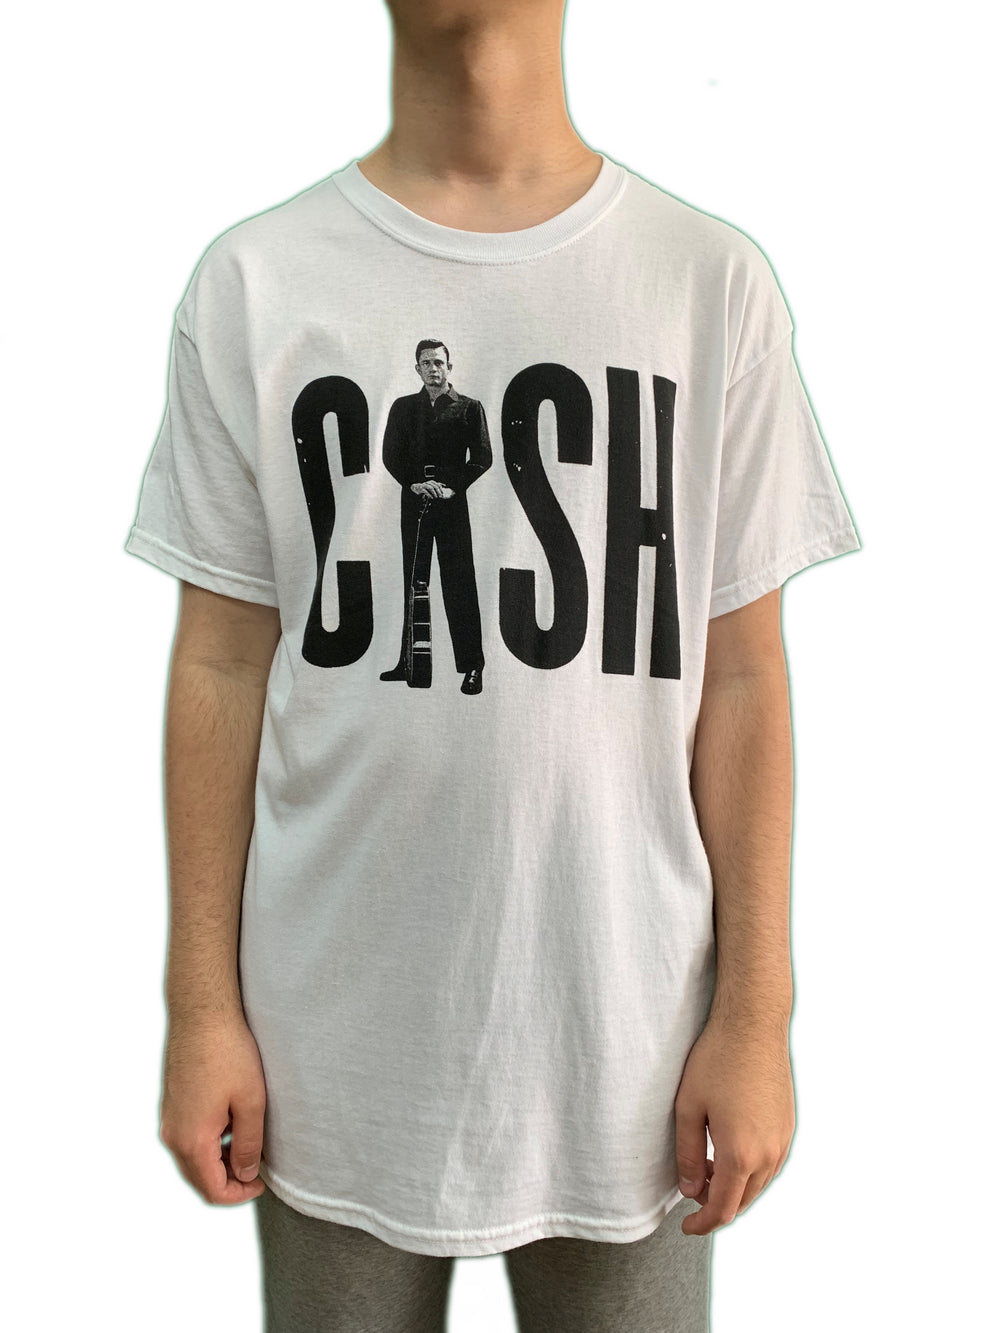 Johnny Cash Standing Unisex Official T Shirt Brand New Various Sizes